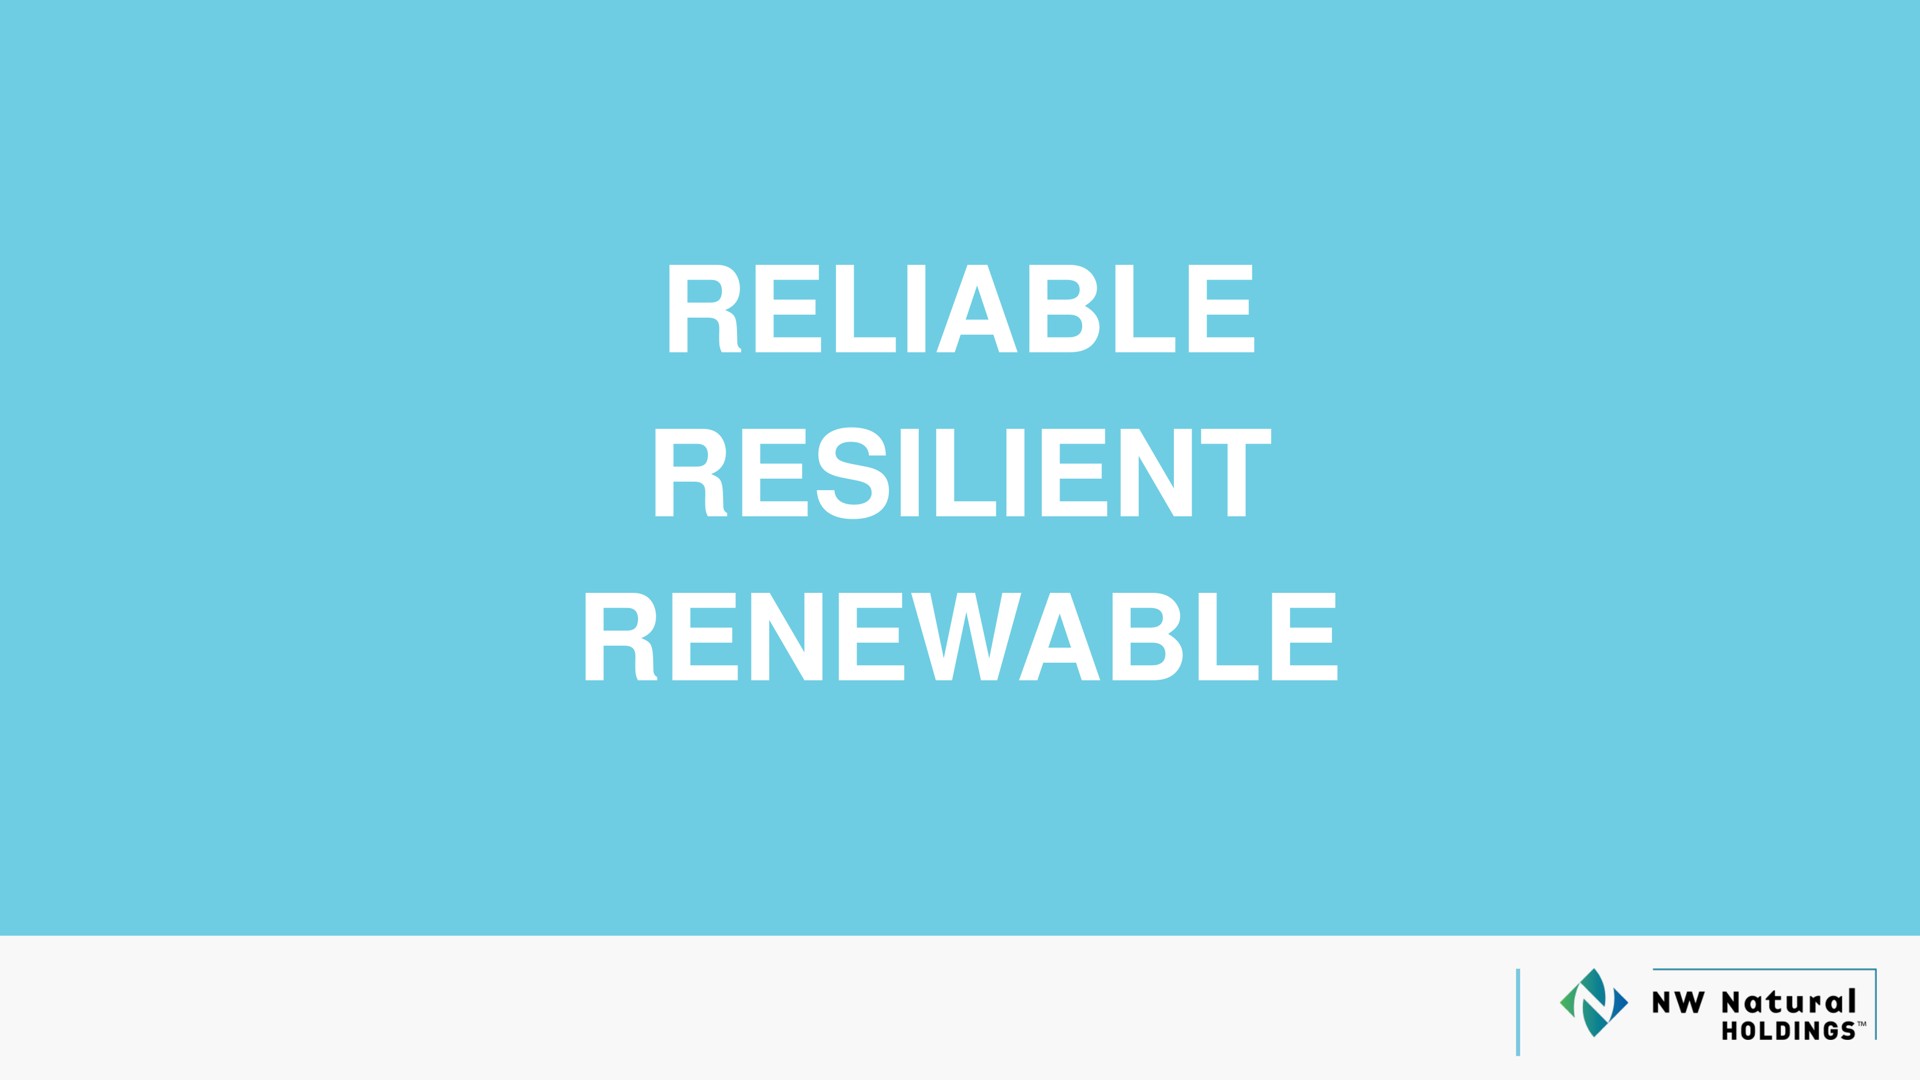 reliable resilient renewable | NW Natural Holdings